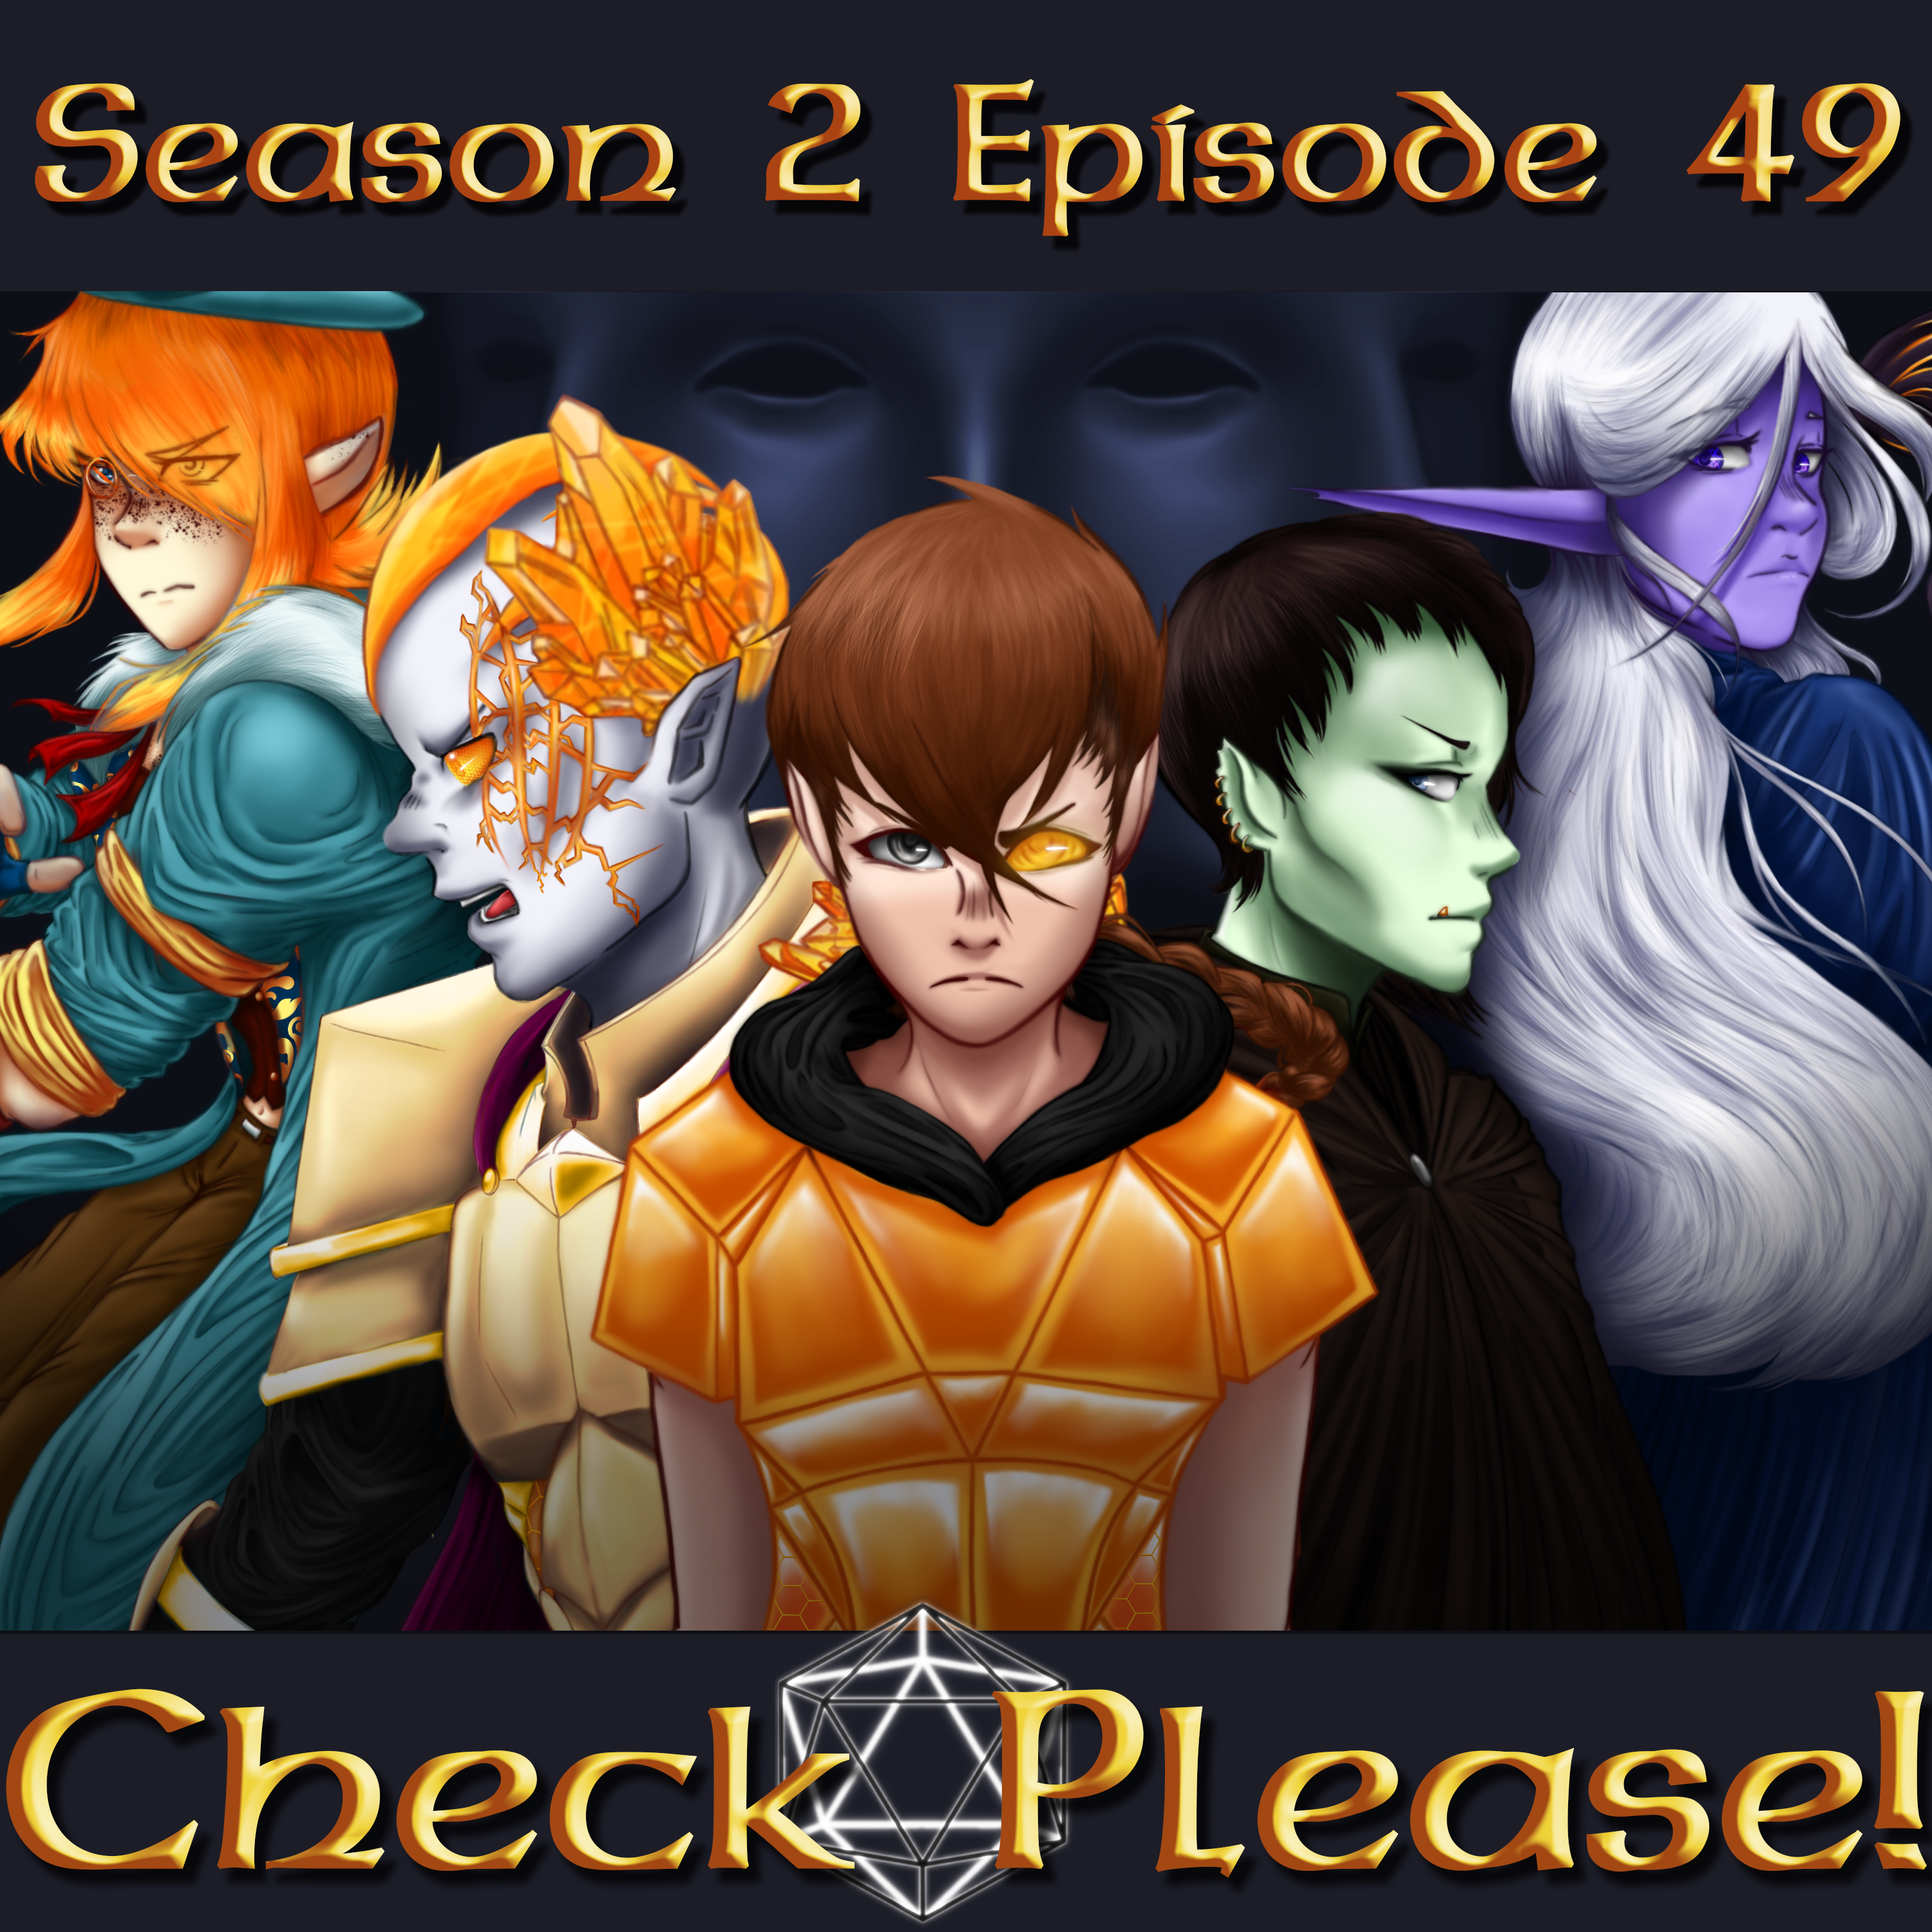 Check Please! S2 E49: Can't Take It With You...